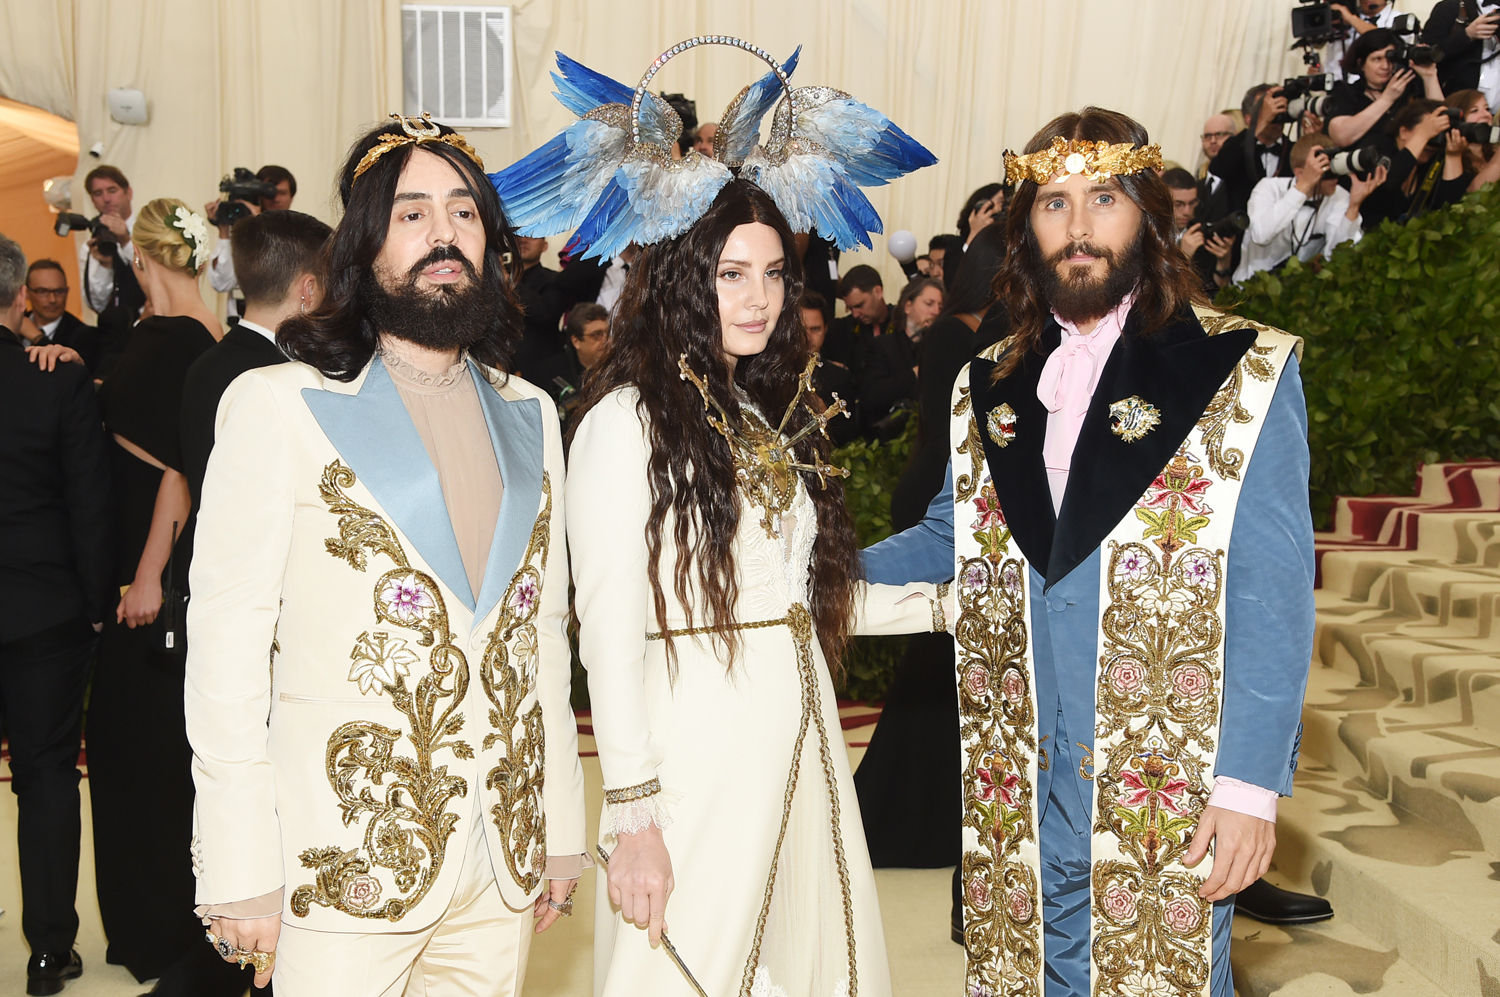 Met Gala 2018: The Most Controversial Looks On The Red Carpet